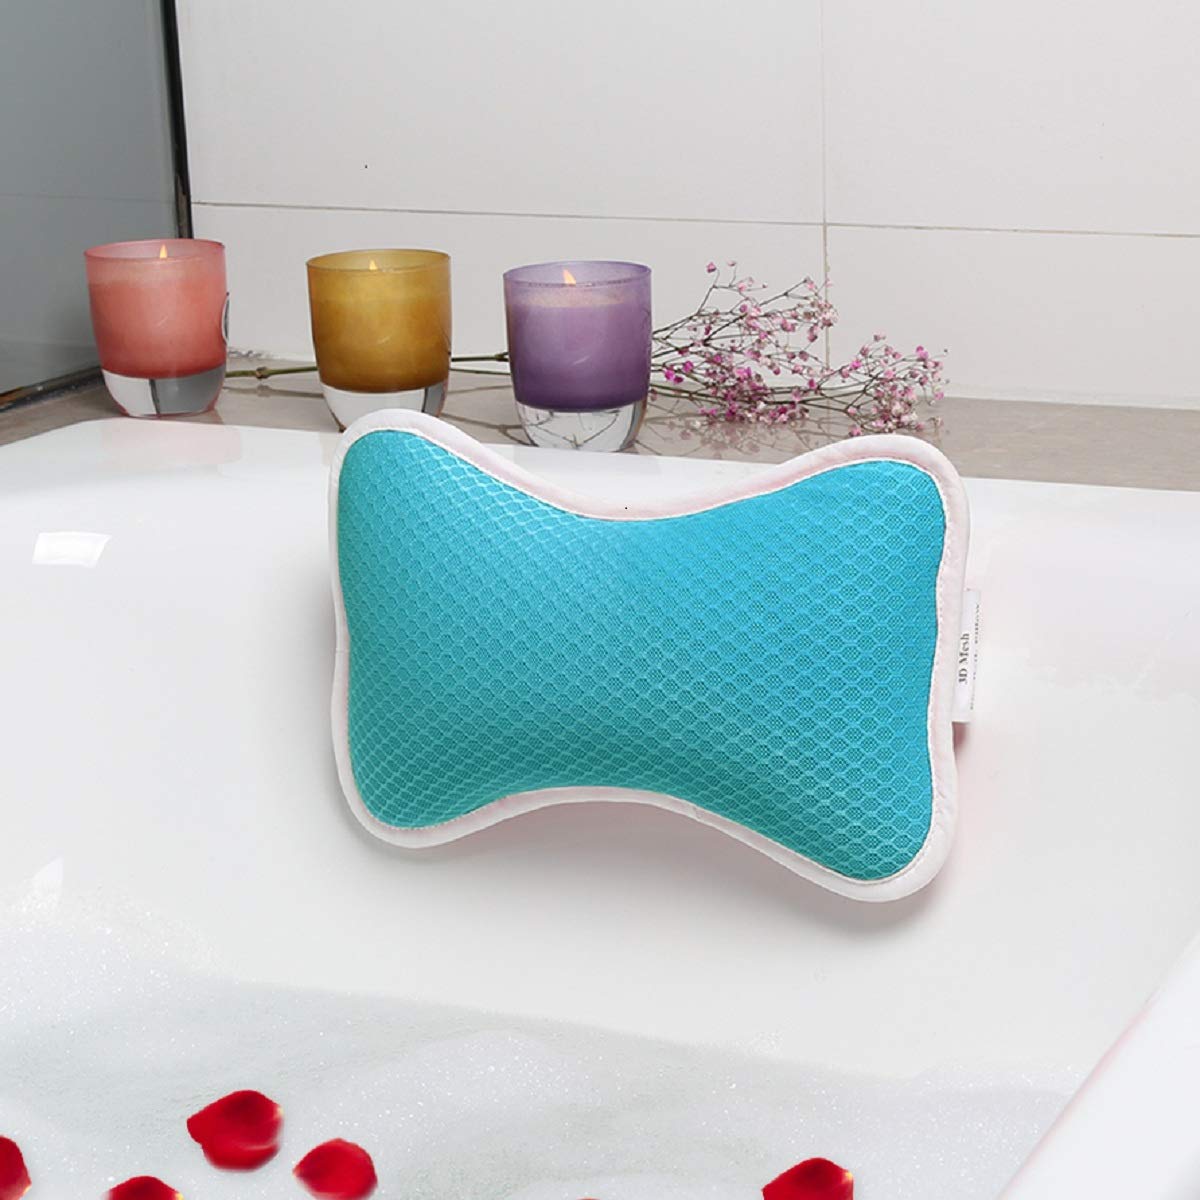 The 10 Best Bath Pillows for Your Lavish Spa Day